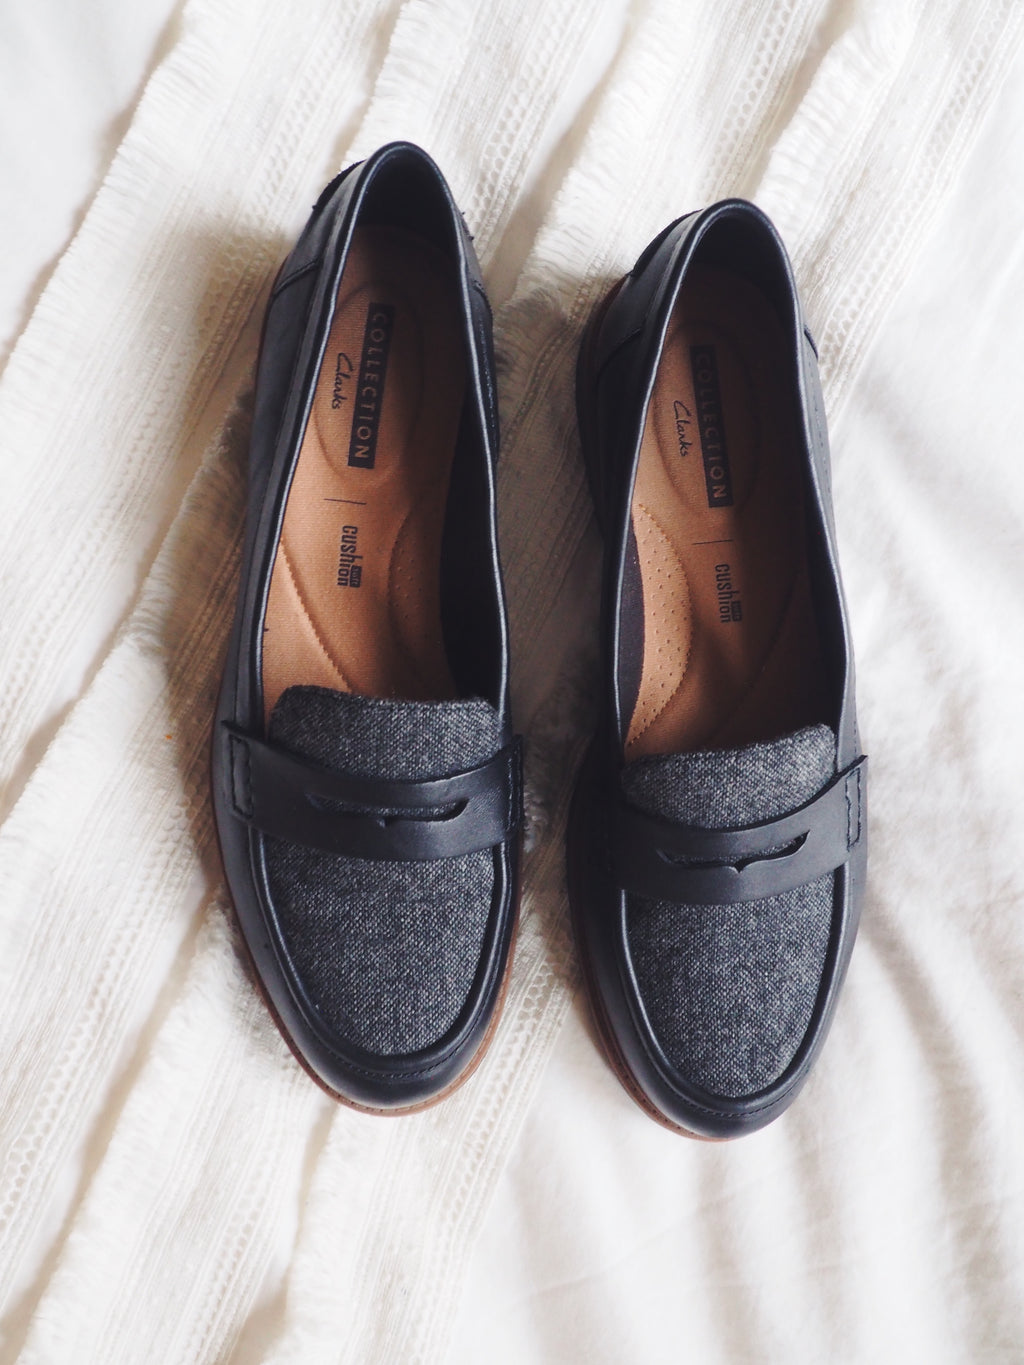 Clark’s Two-Tone Loafers